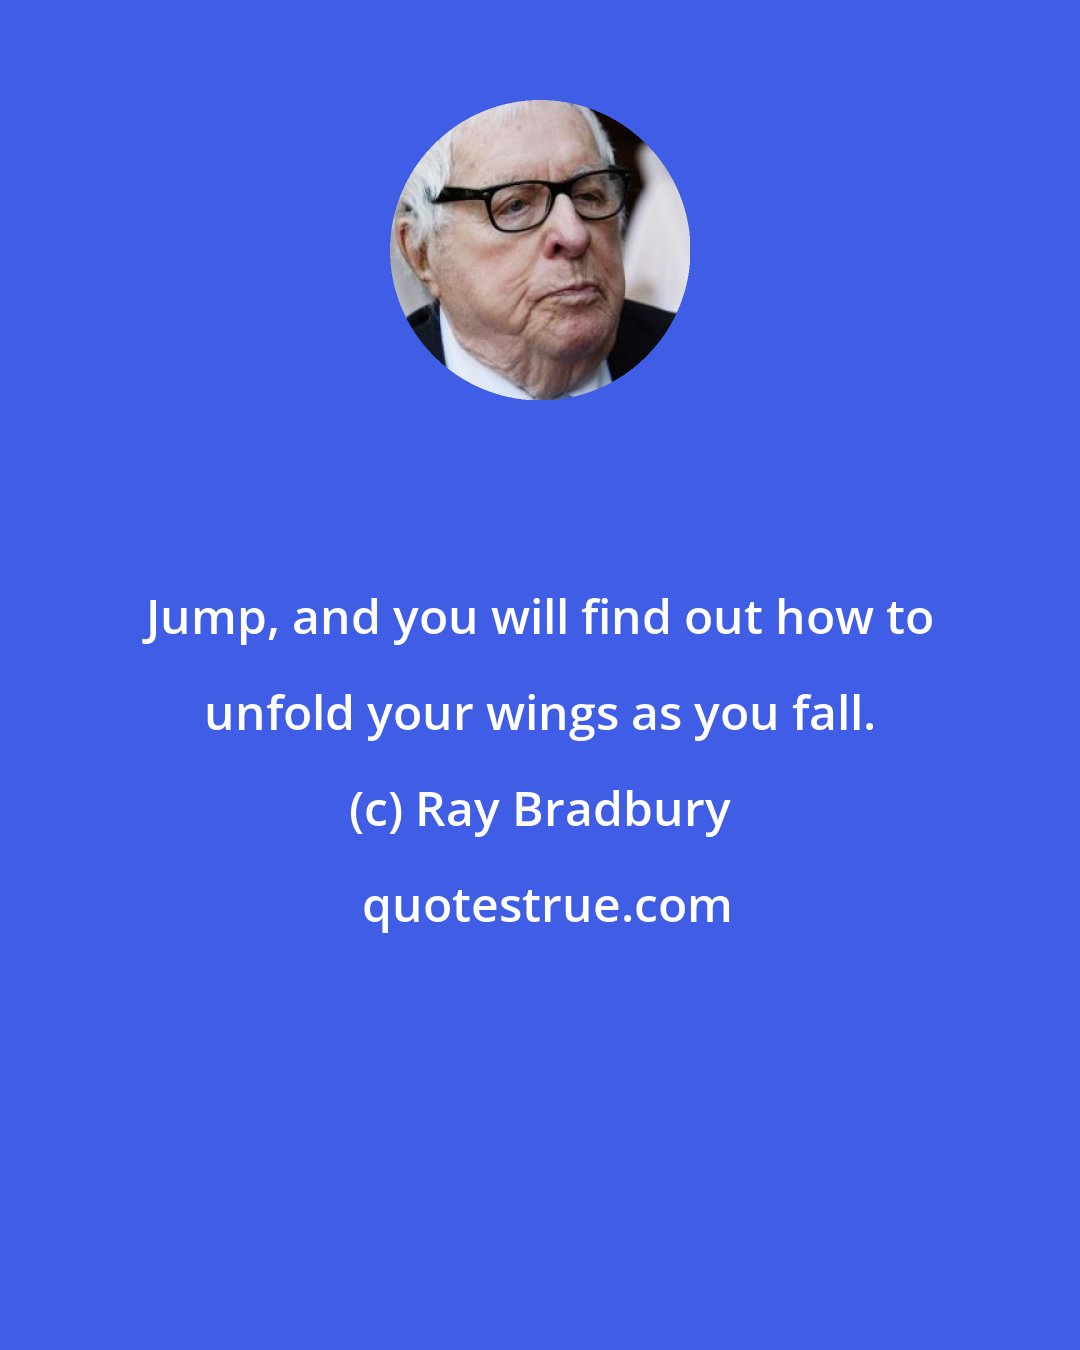 Ray Bradbury: Jump, and you will find out how to unfold your wings as you fall.